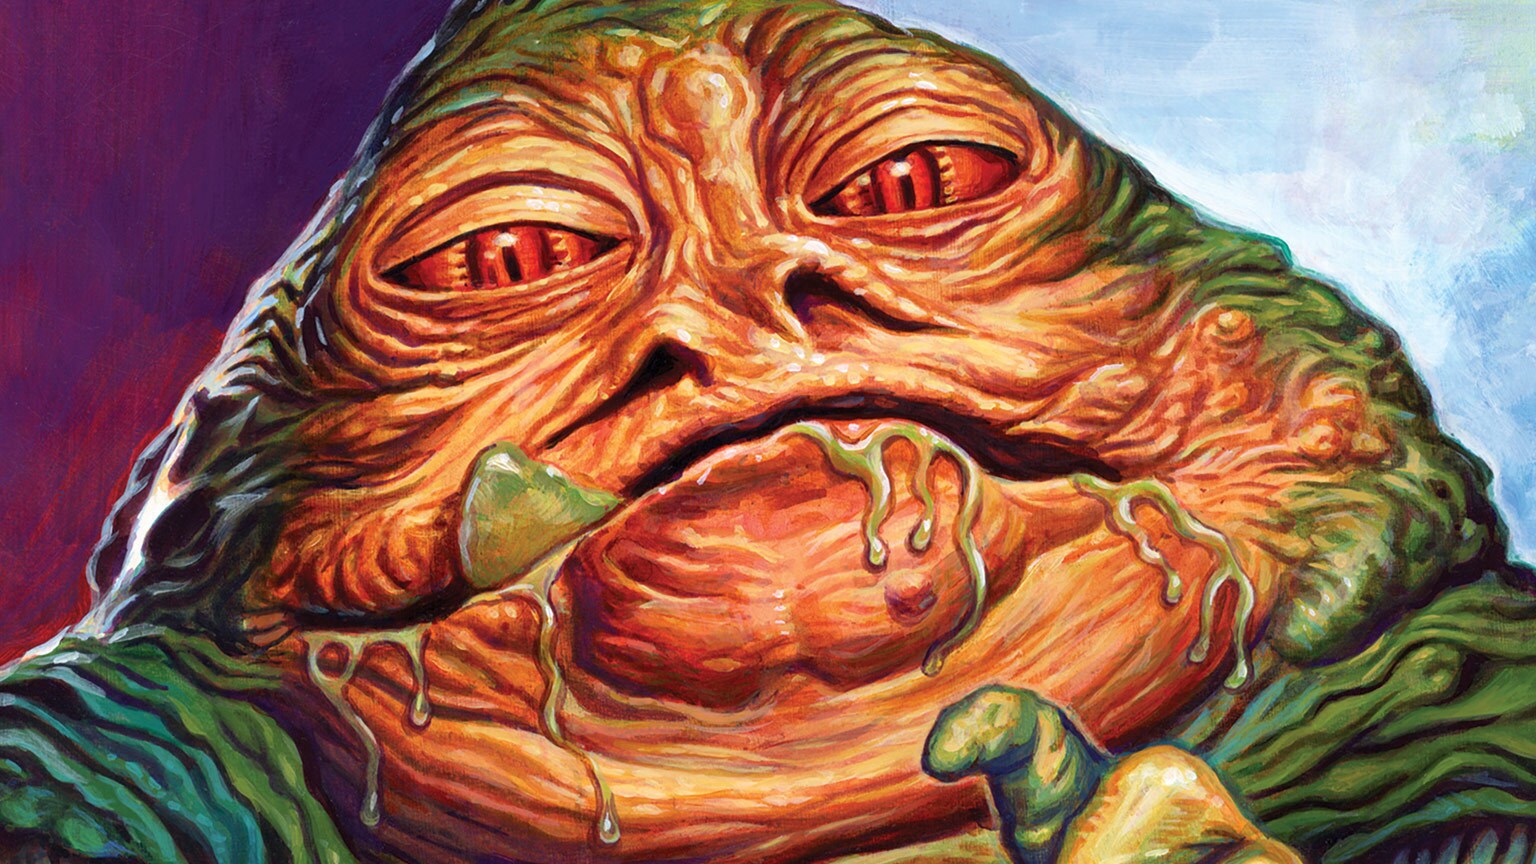 From the Pages of Star Wars Insider: Inside Jabba the Hutt